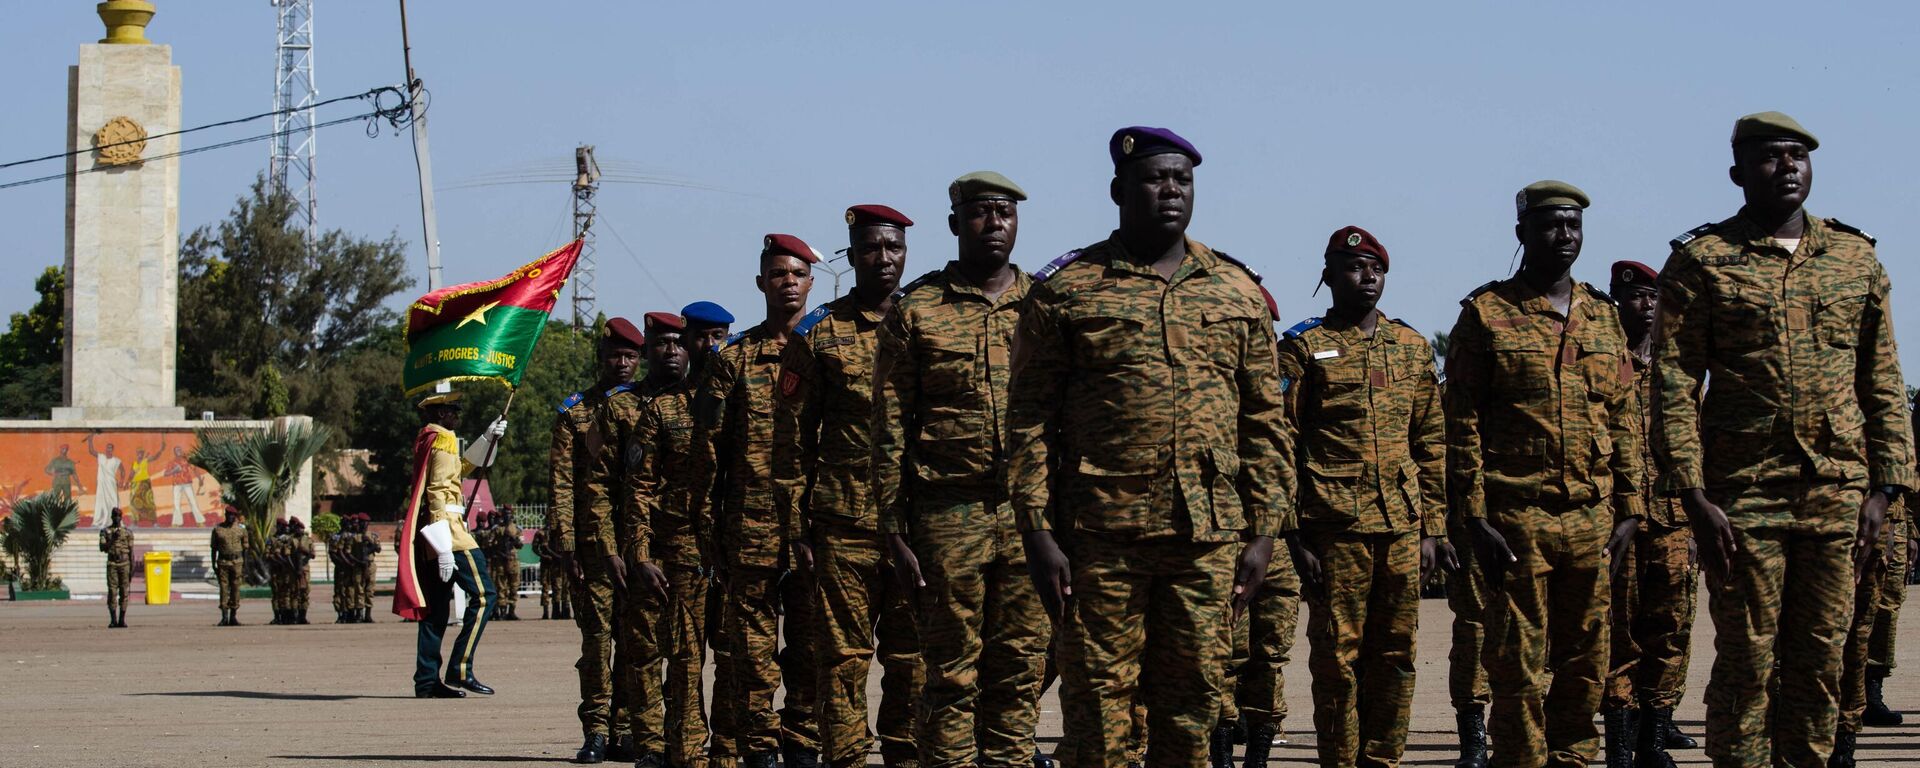 Soldiers from different army corps to be decorated with medals arrive during the 62nd anniversary of the creation of the Burkina Faso Armed Forces at the Nation Square in Ouagadougou on November 1, 2022.  - Sputnik International, 1920, 10.12.2022